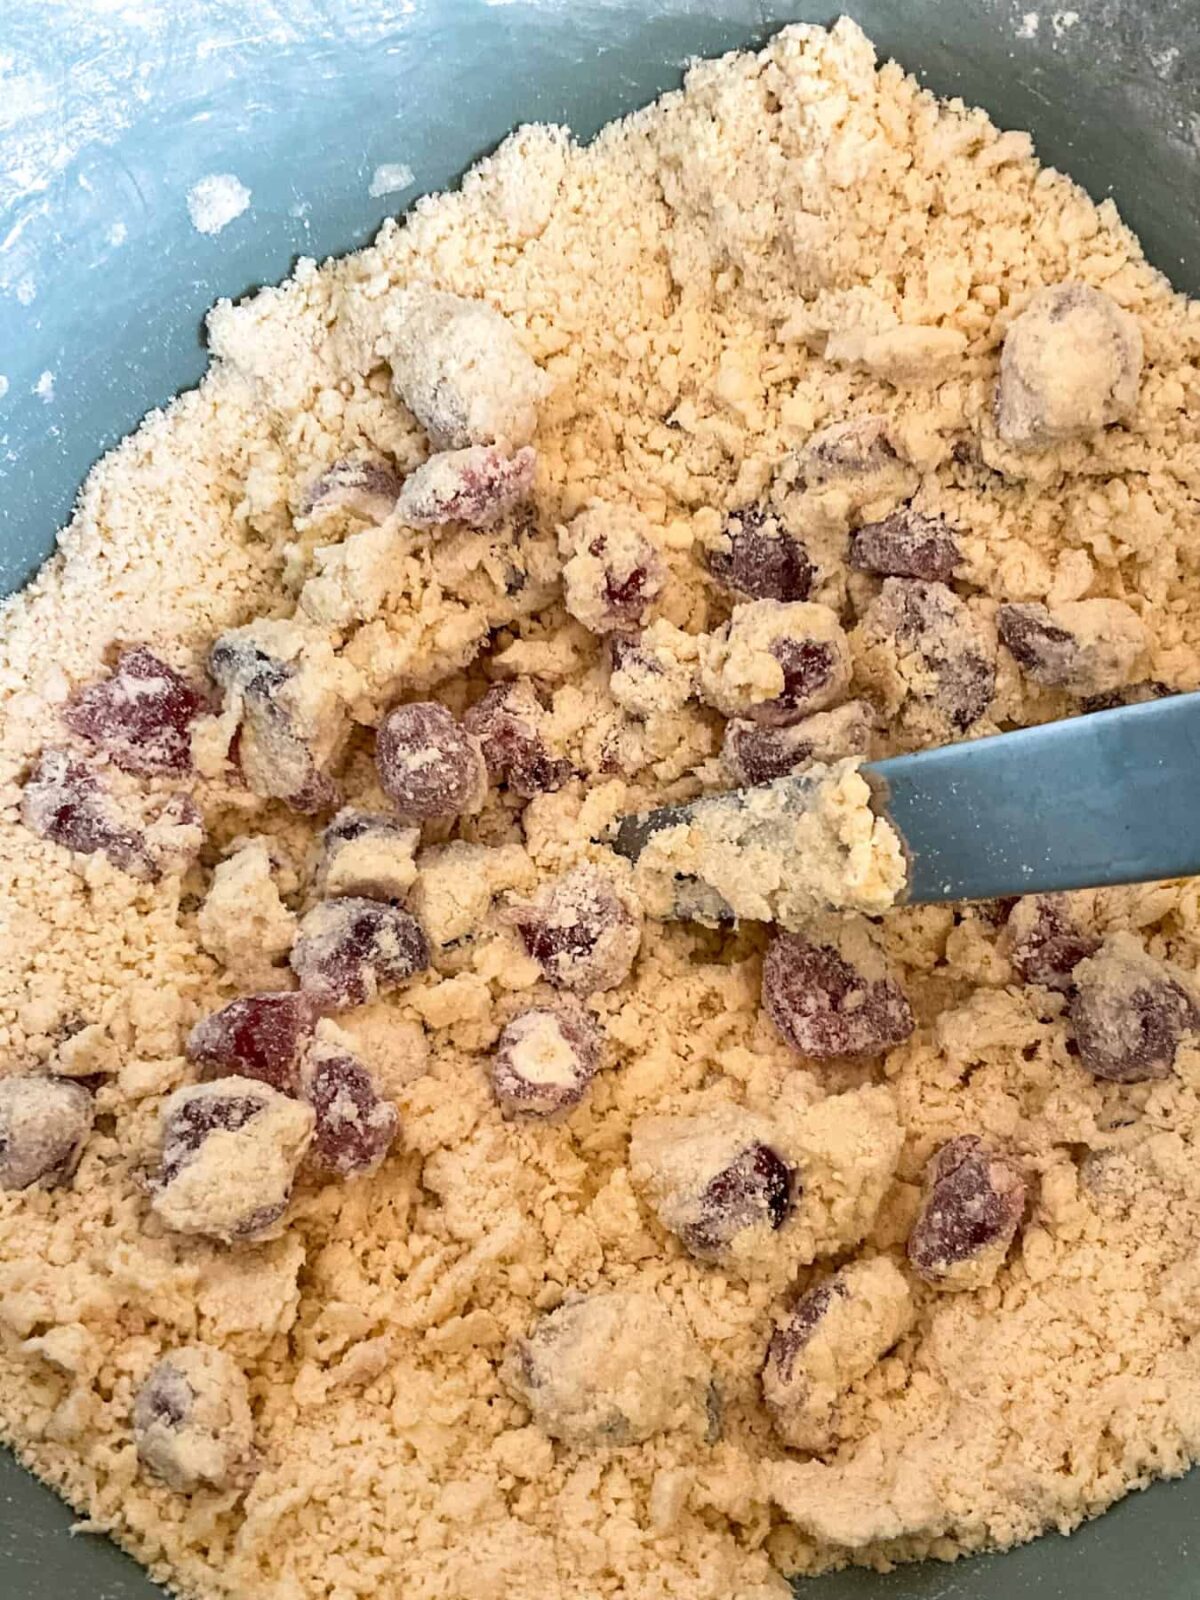 Milk stirred through the cherries and crumbed mixture with a cutlery knife.